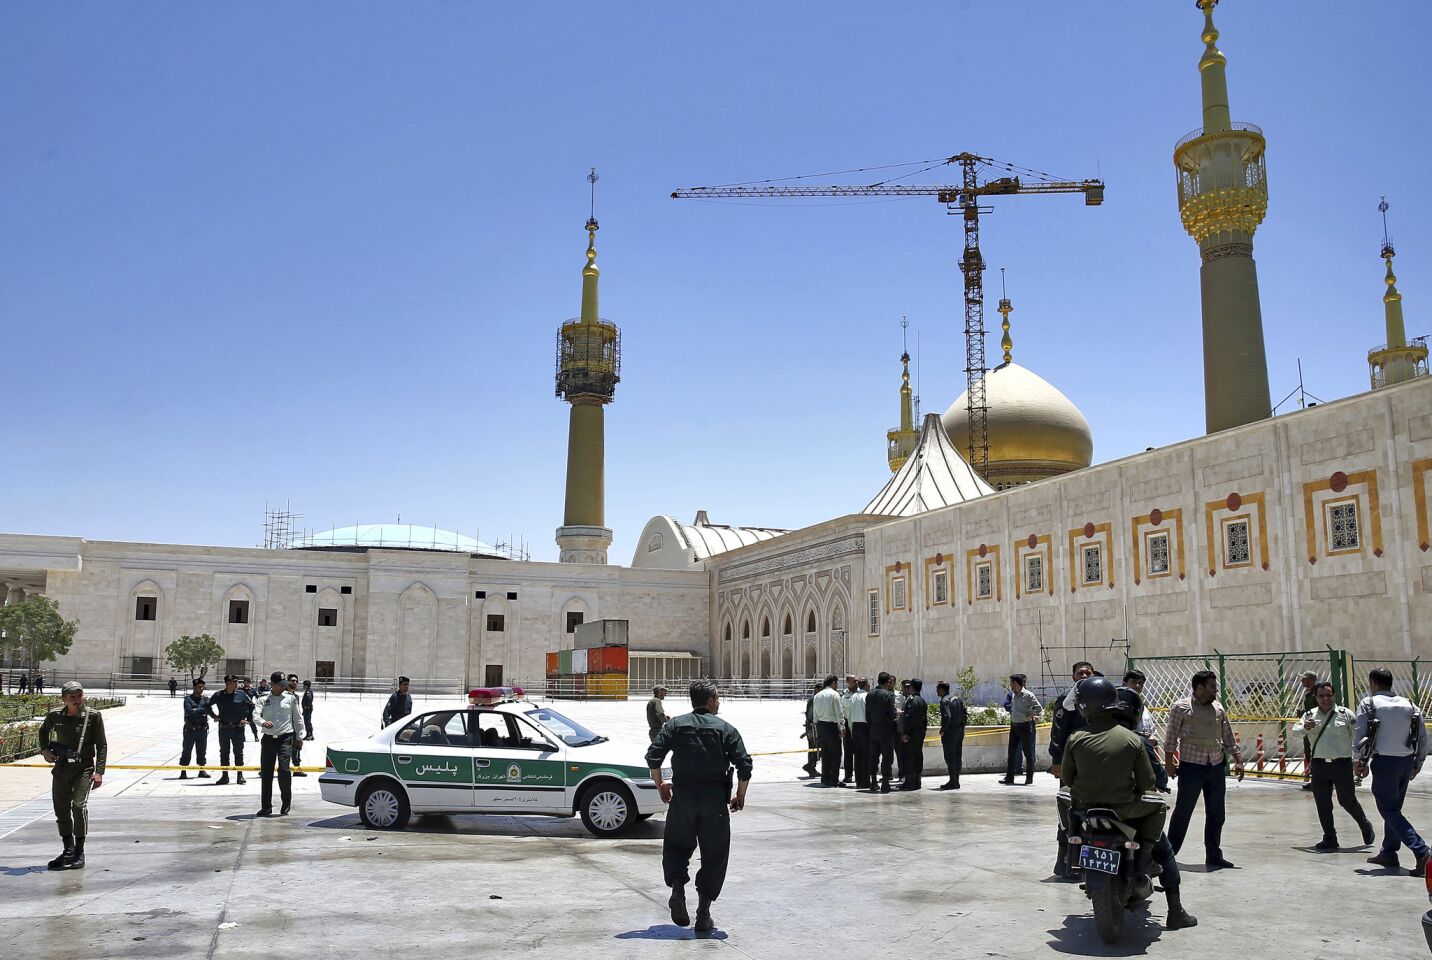 Police monitor the scene around the shrine of late Iranian revolutionary founder Ayatollah Khomeini after an assault by several attackers in Tehran.